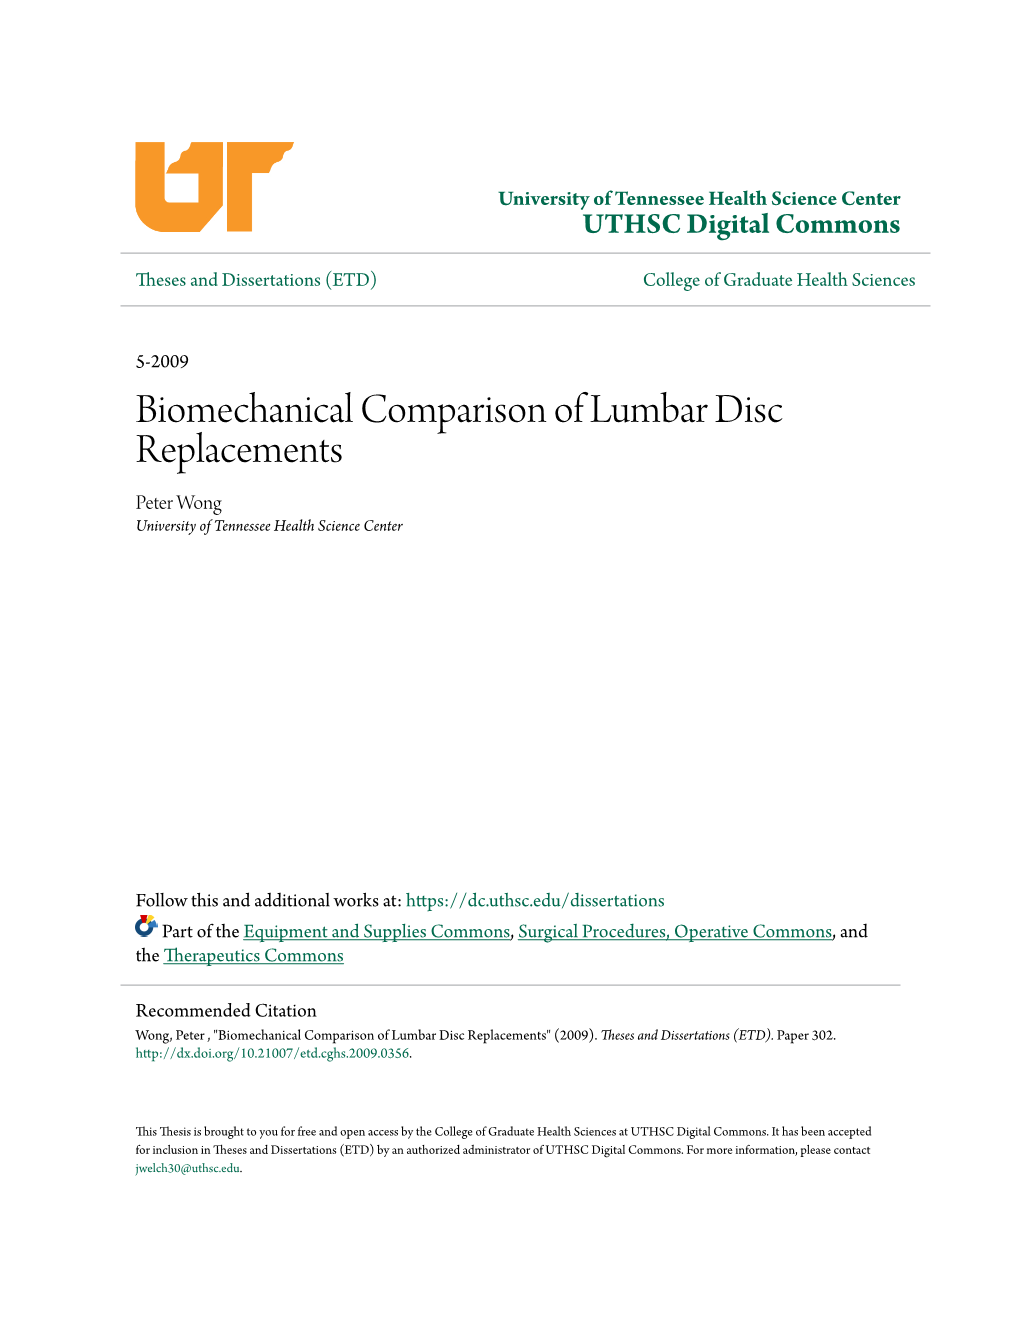 Biomechanical Comparison of Lumbar Disc Replacements Peter Wong University of Tennessee Health Science Center